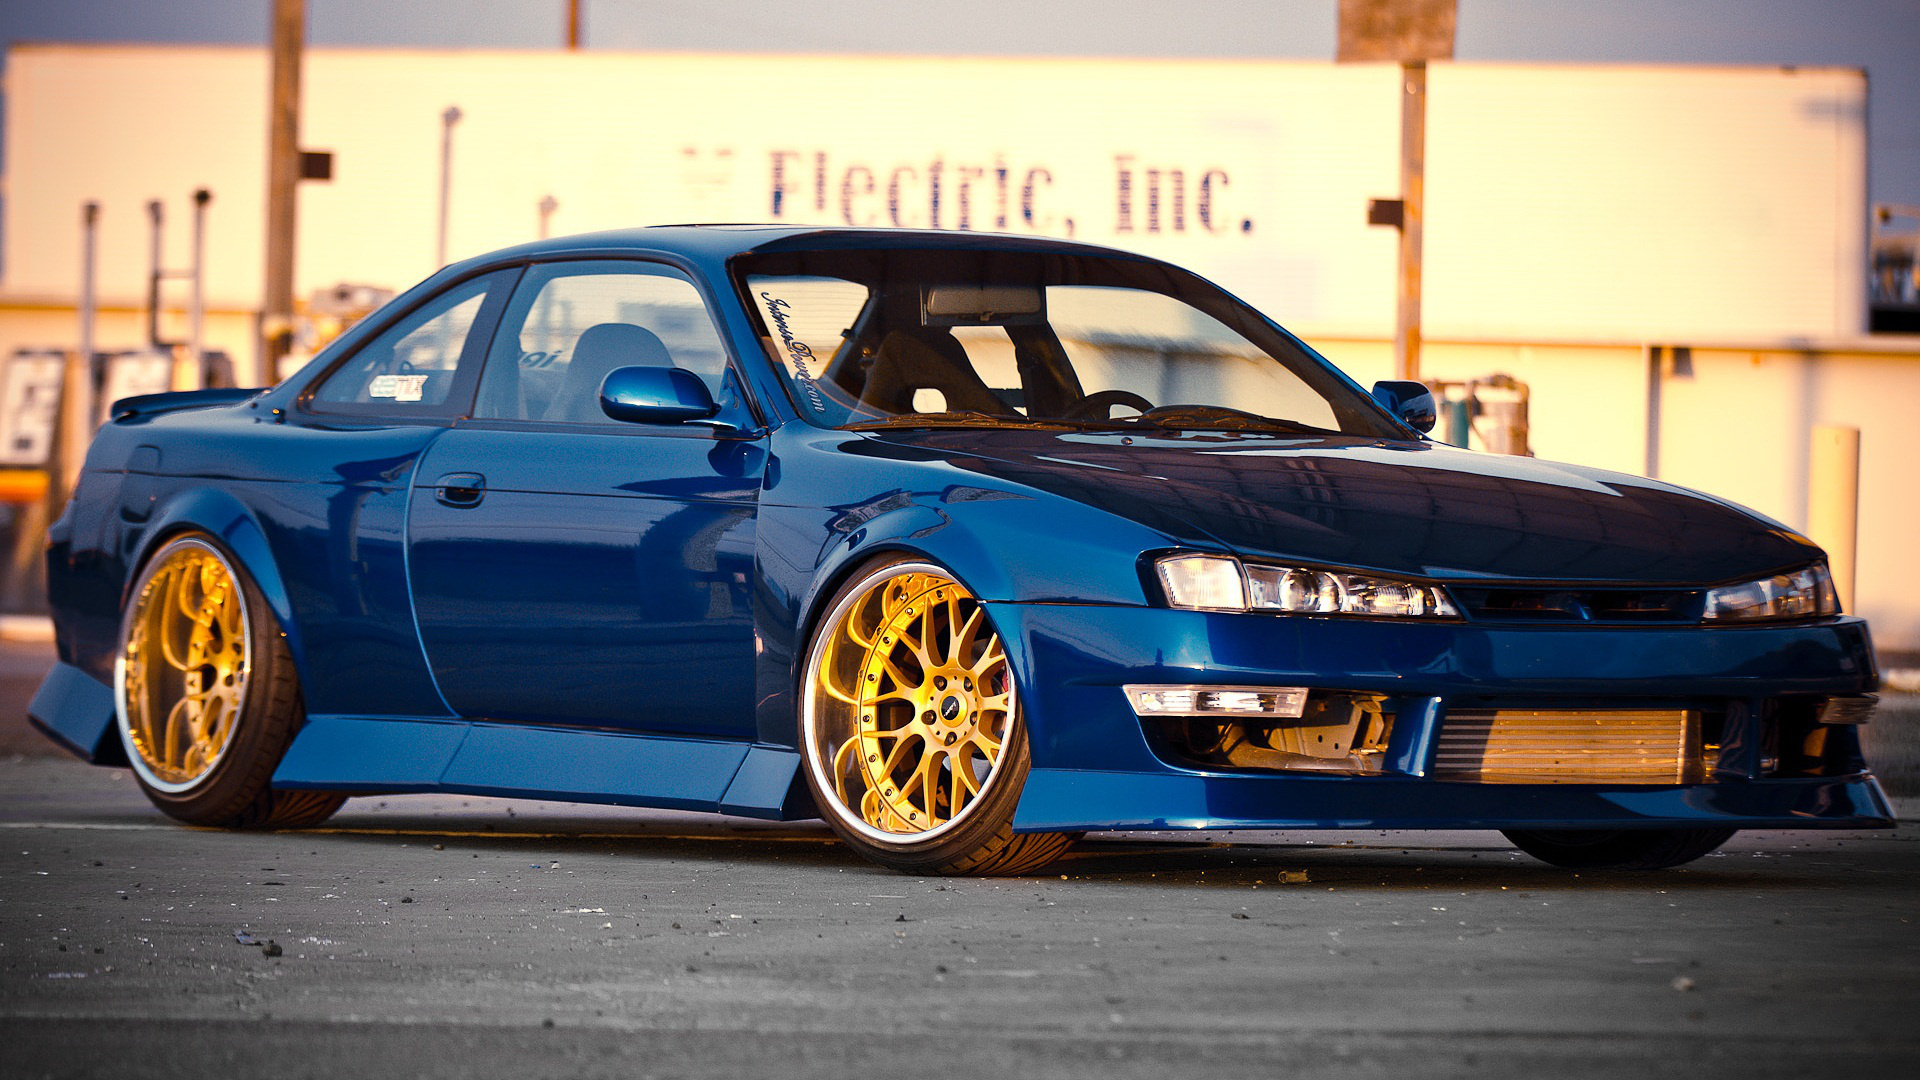 nissan, S14, Silvia, Tuning, Vehicles, Cars, Roads, Wheels, Rims, Stance, Color, Contrast Wallpaper